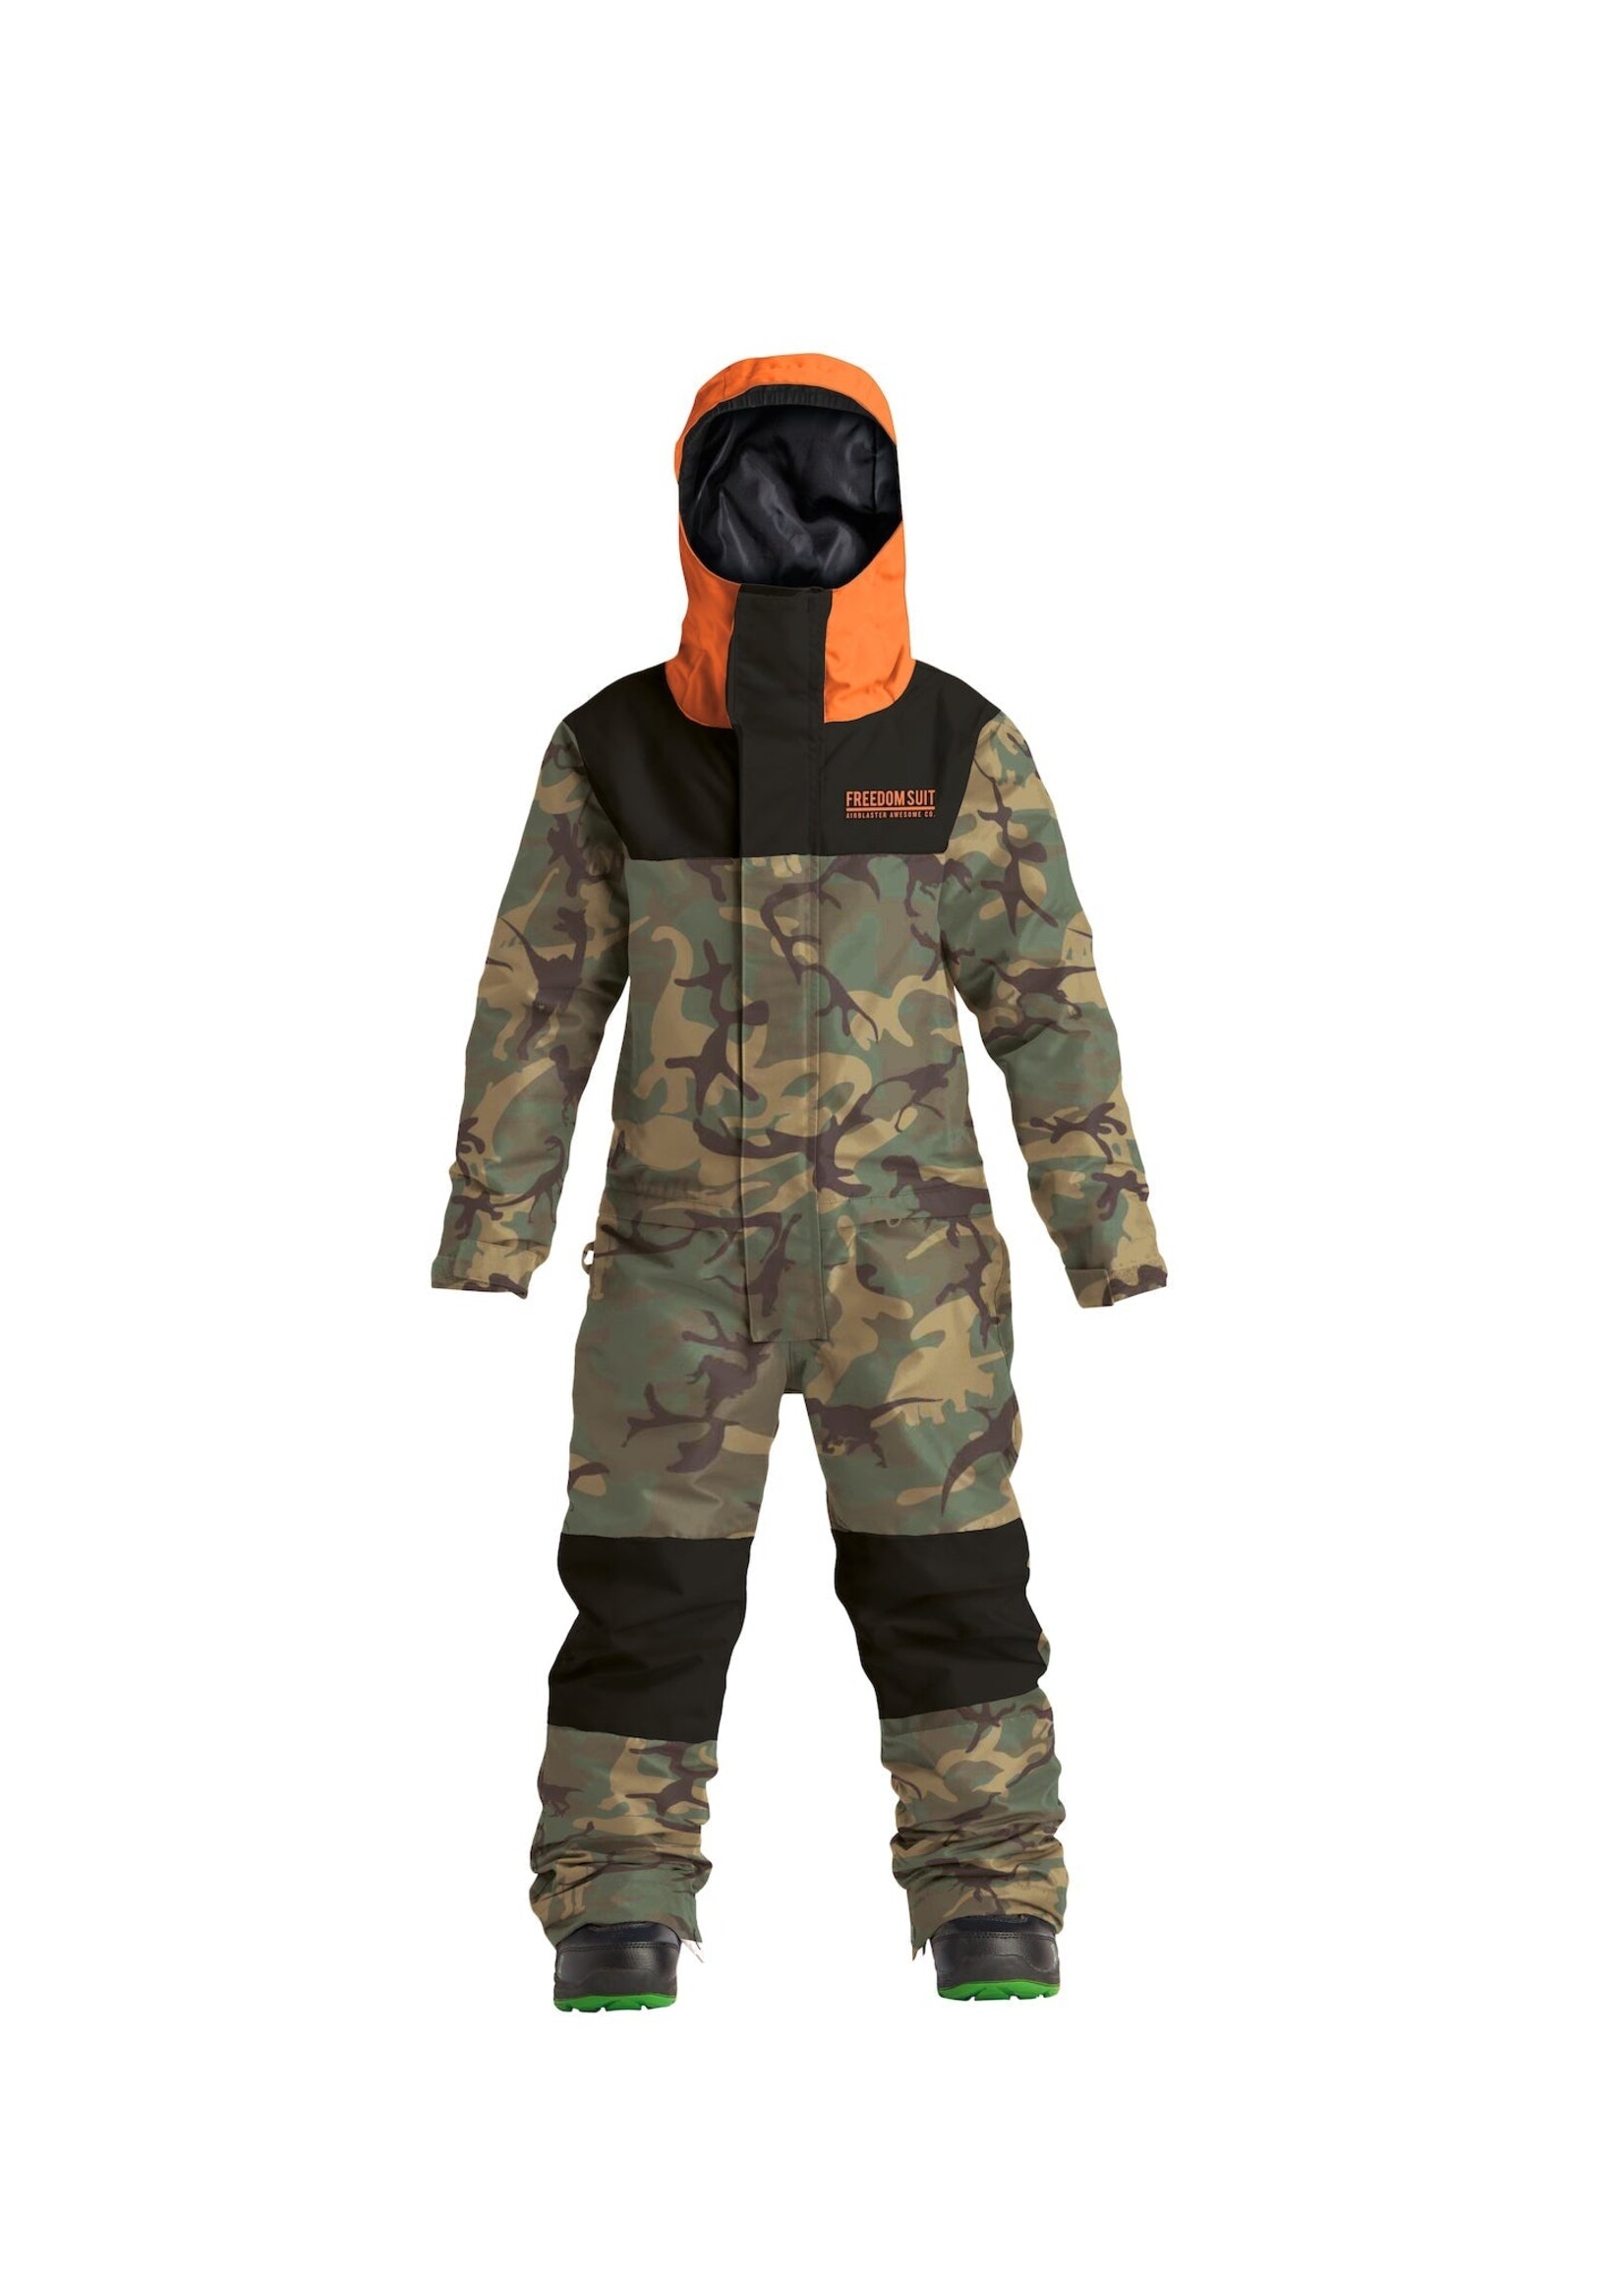 Airblaster FREEDOM SUIT YOUTH W23